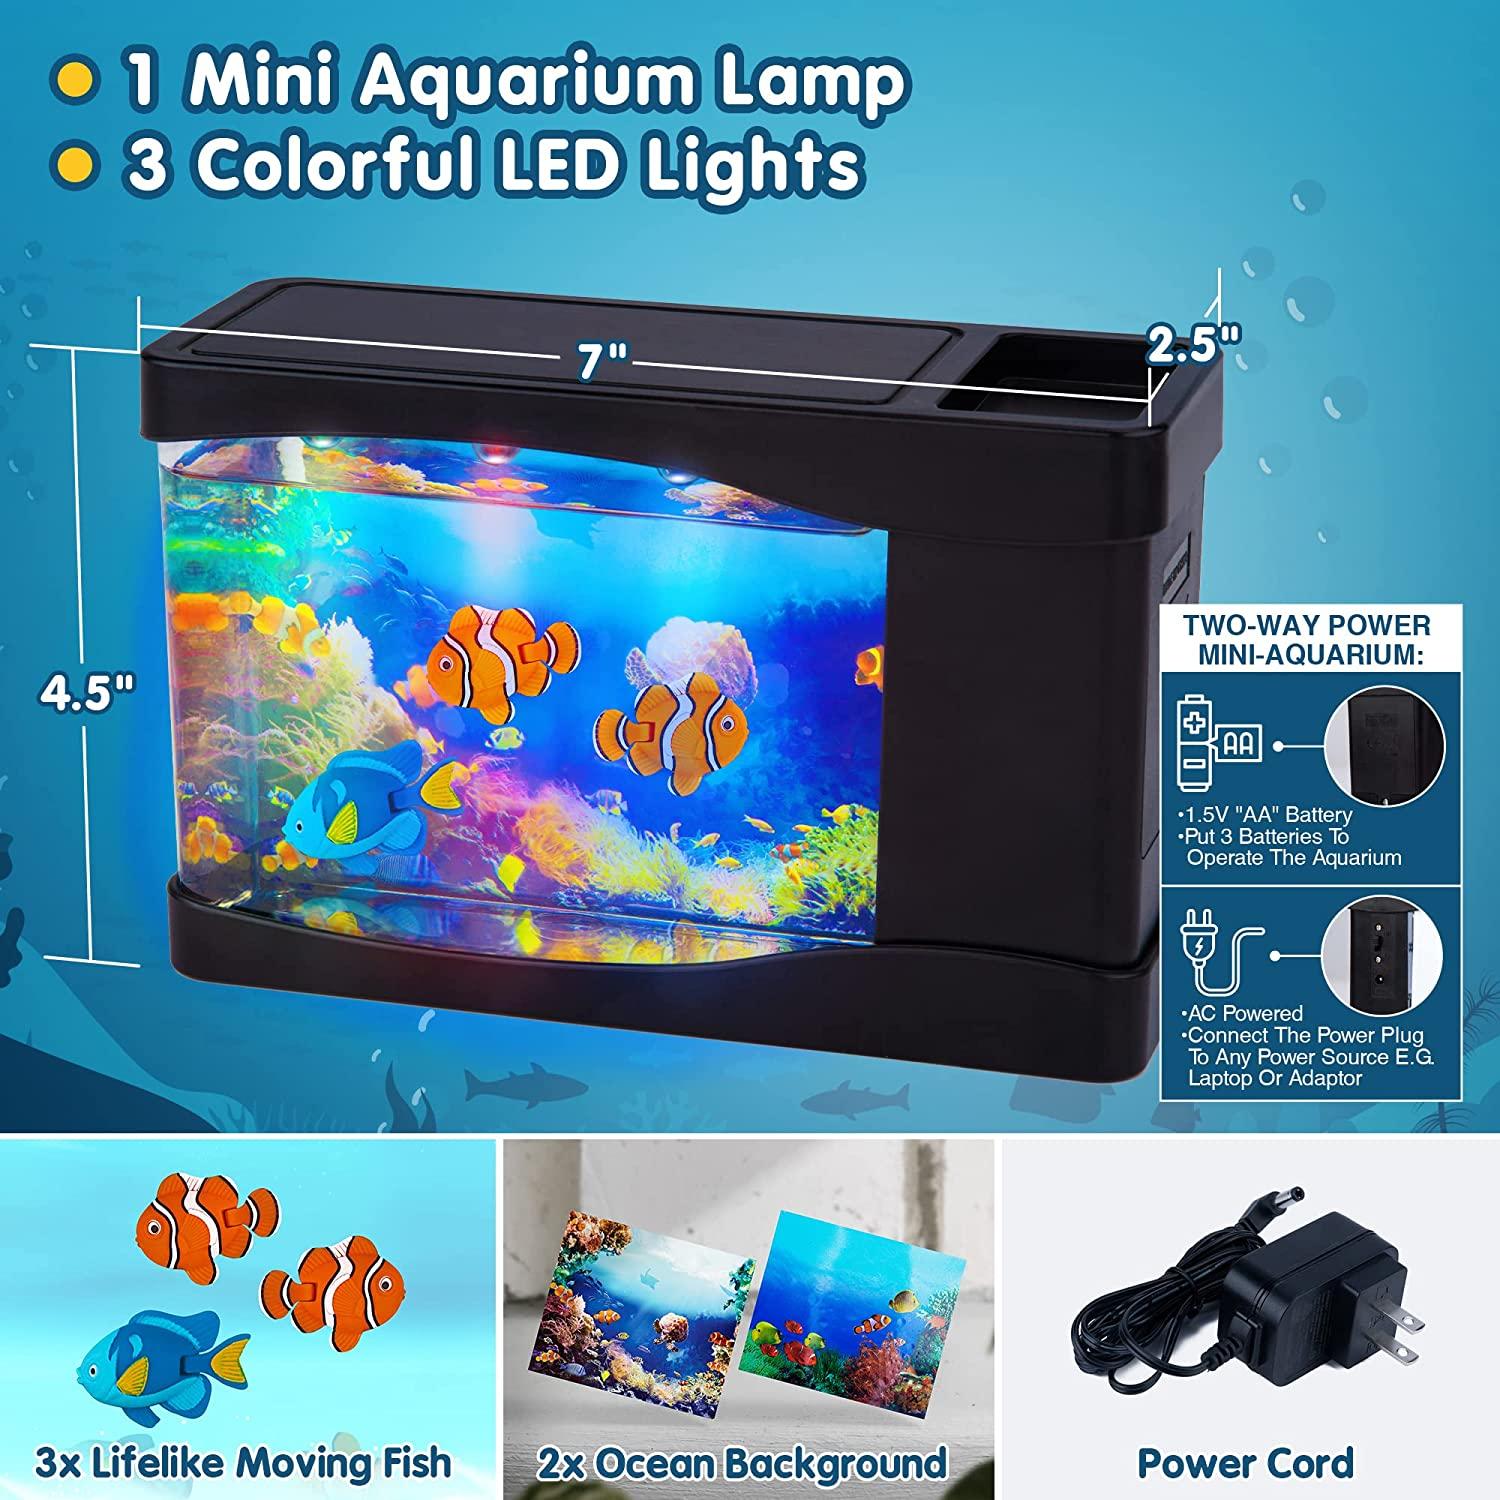 Artificial Fish Tank Virtual Ocean Toy in Motion Lamp - Mini Office Desk  Aquarium 3 Colorful LED Lights, Colorful Aquarium Backgrounds - 3 Artificial  Fish, Bubbles Tank with Moving Fish, Gift for Kids